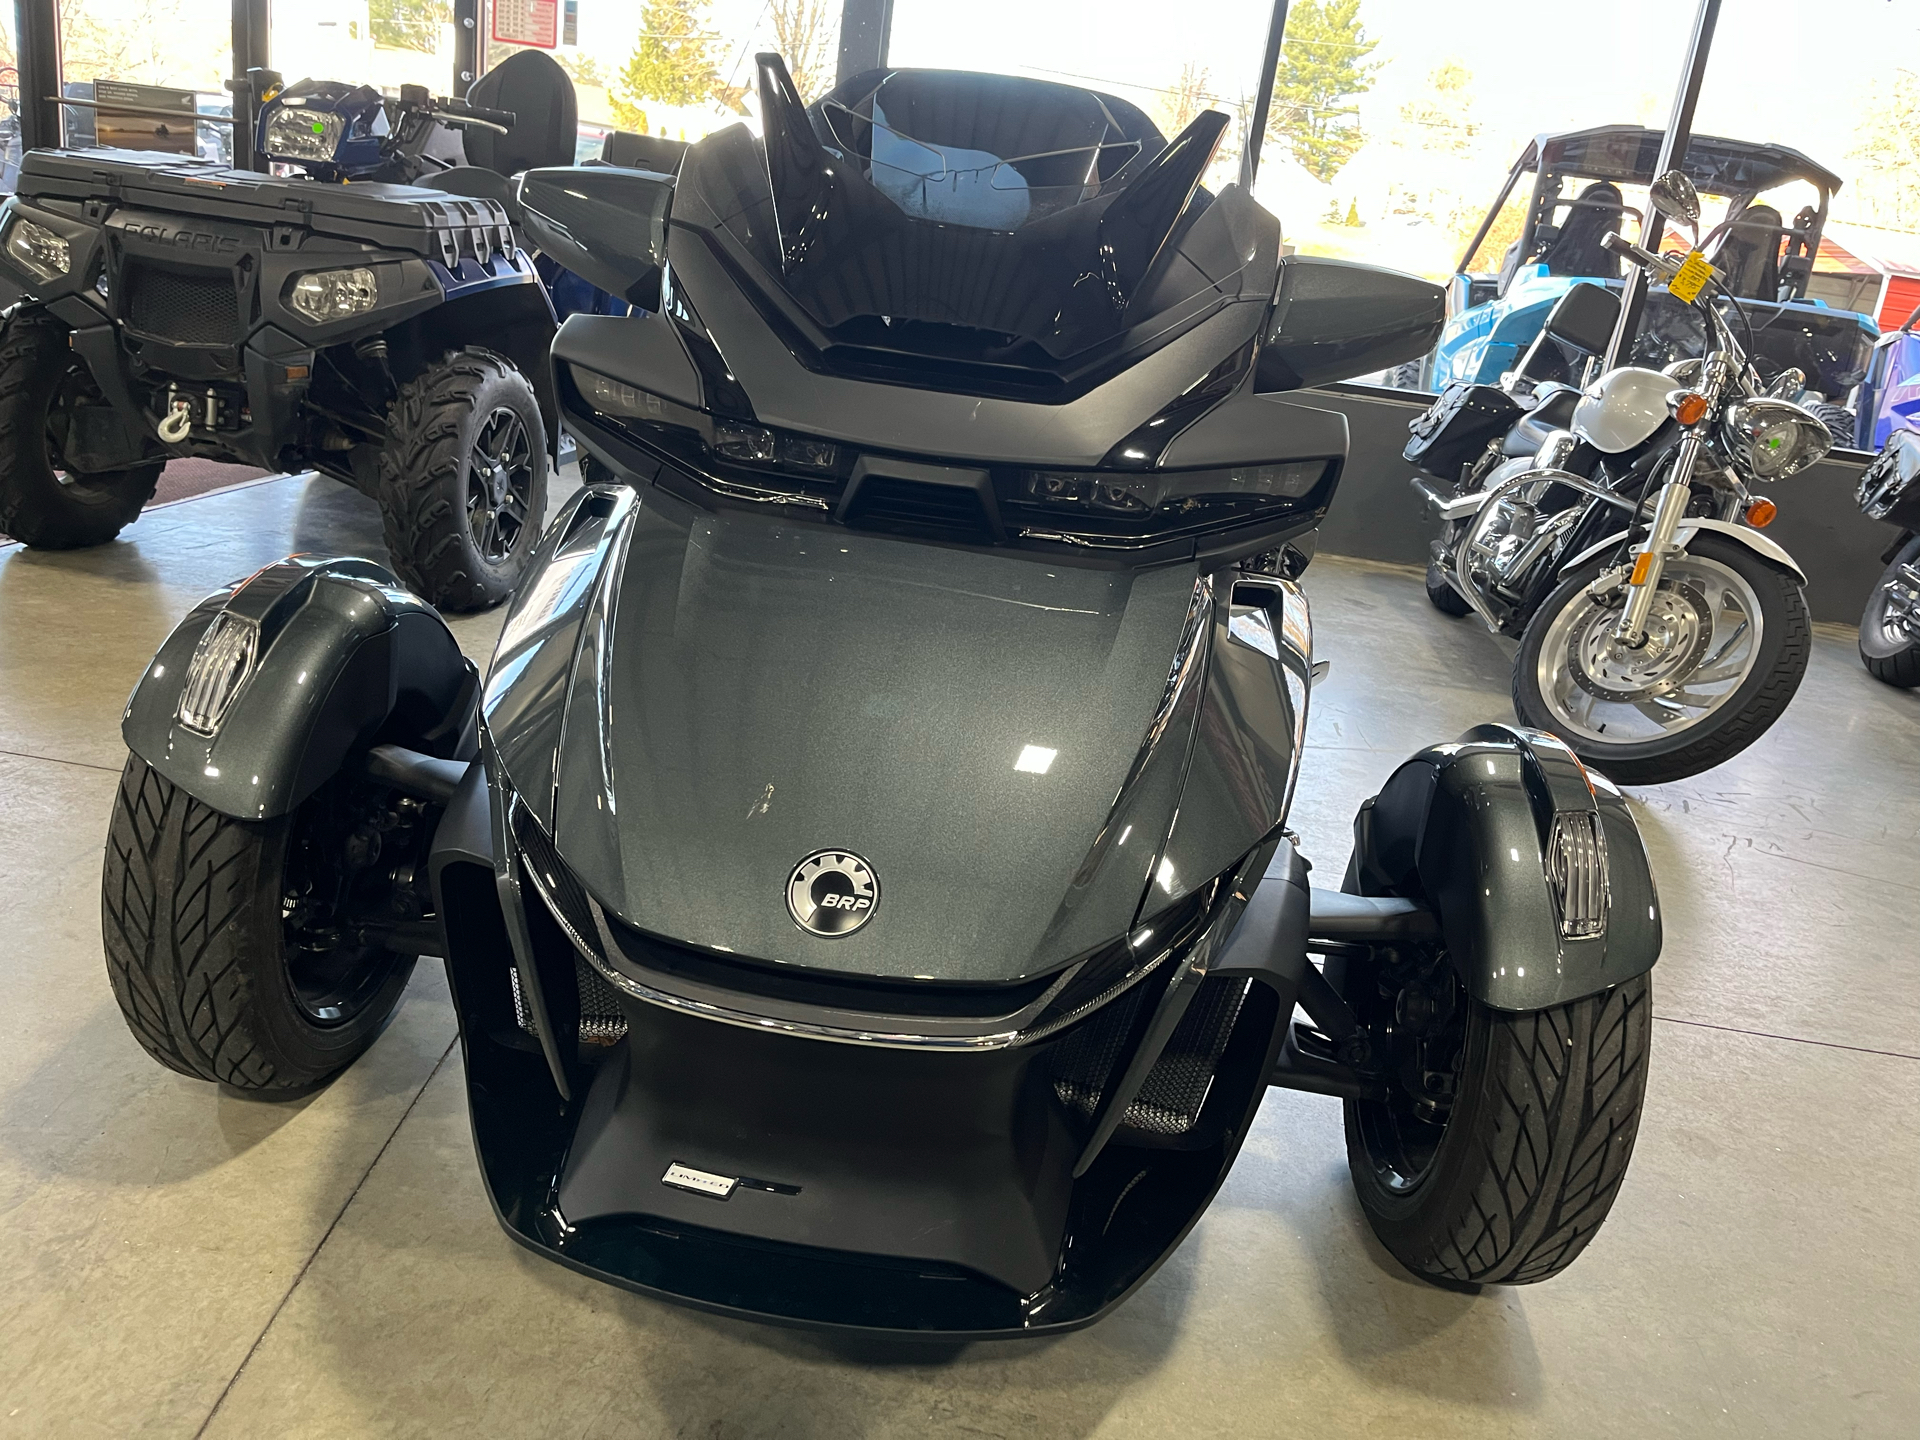 2020 Can-Am Spyder RT Limited in Lewiston, Maine - Photo 2